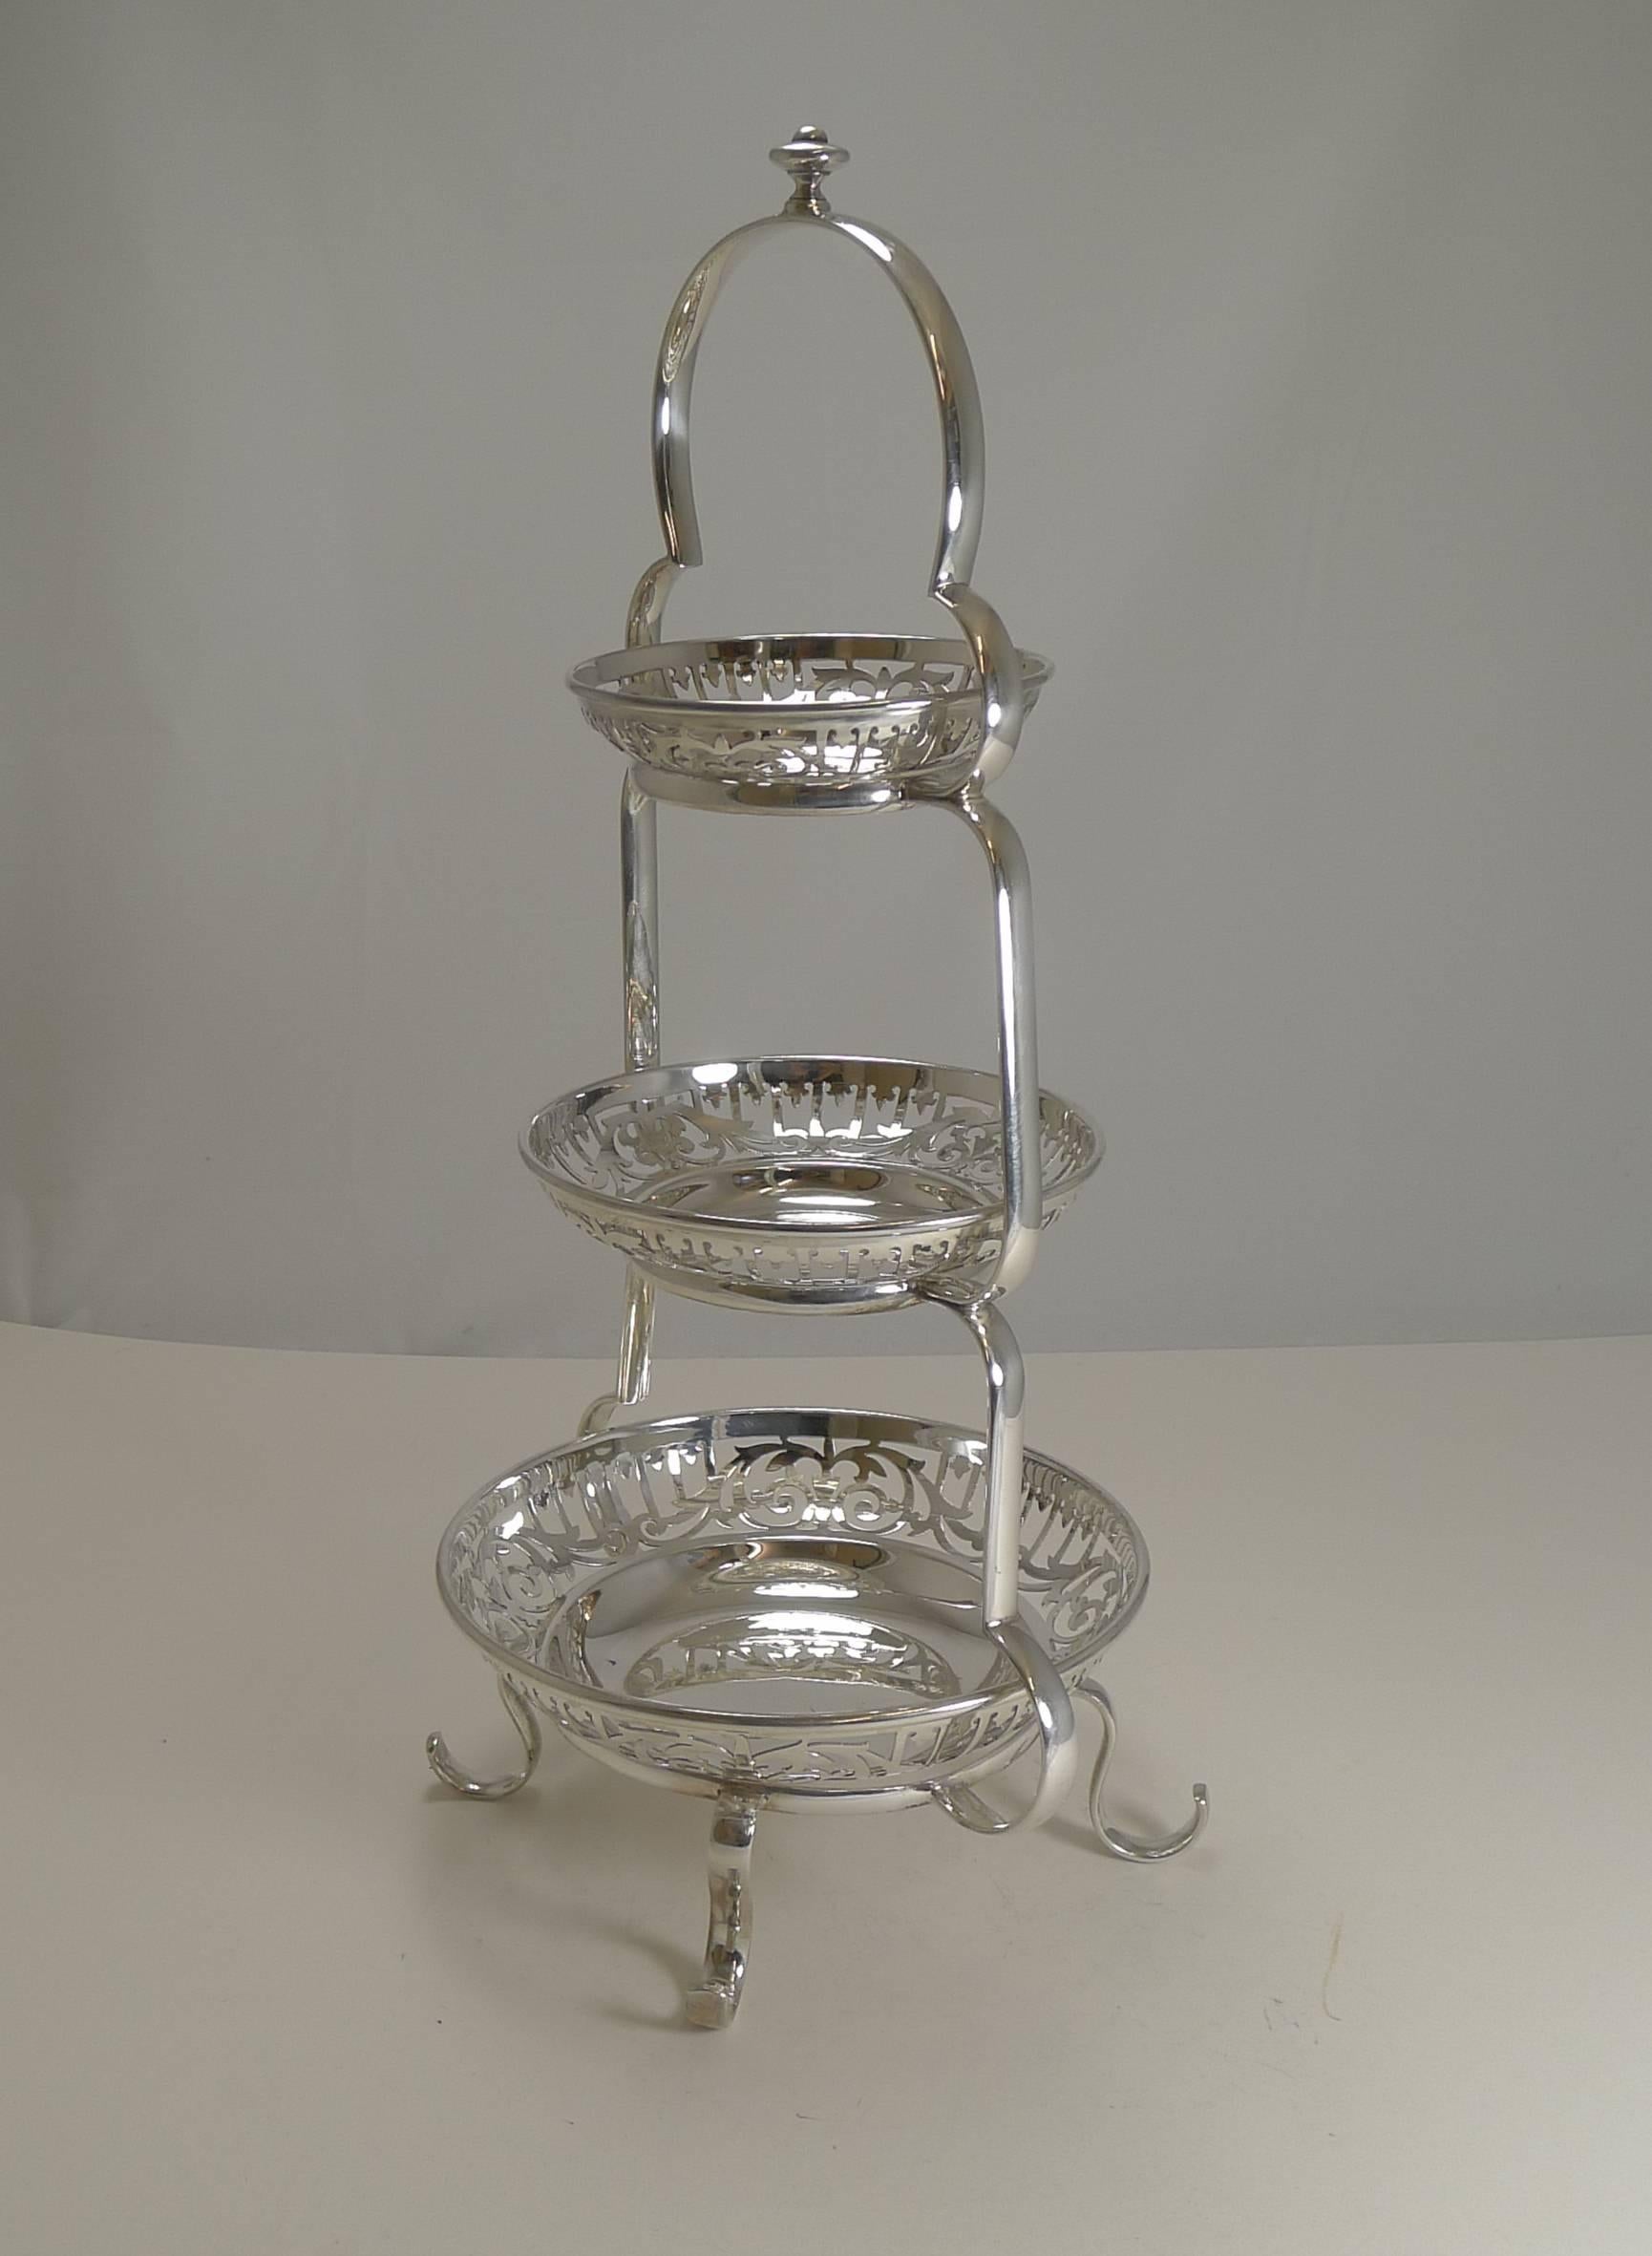 Edwardian Antique English Silver Plated Graduated Cake Stand, circa 1900